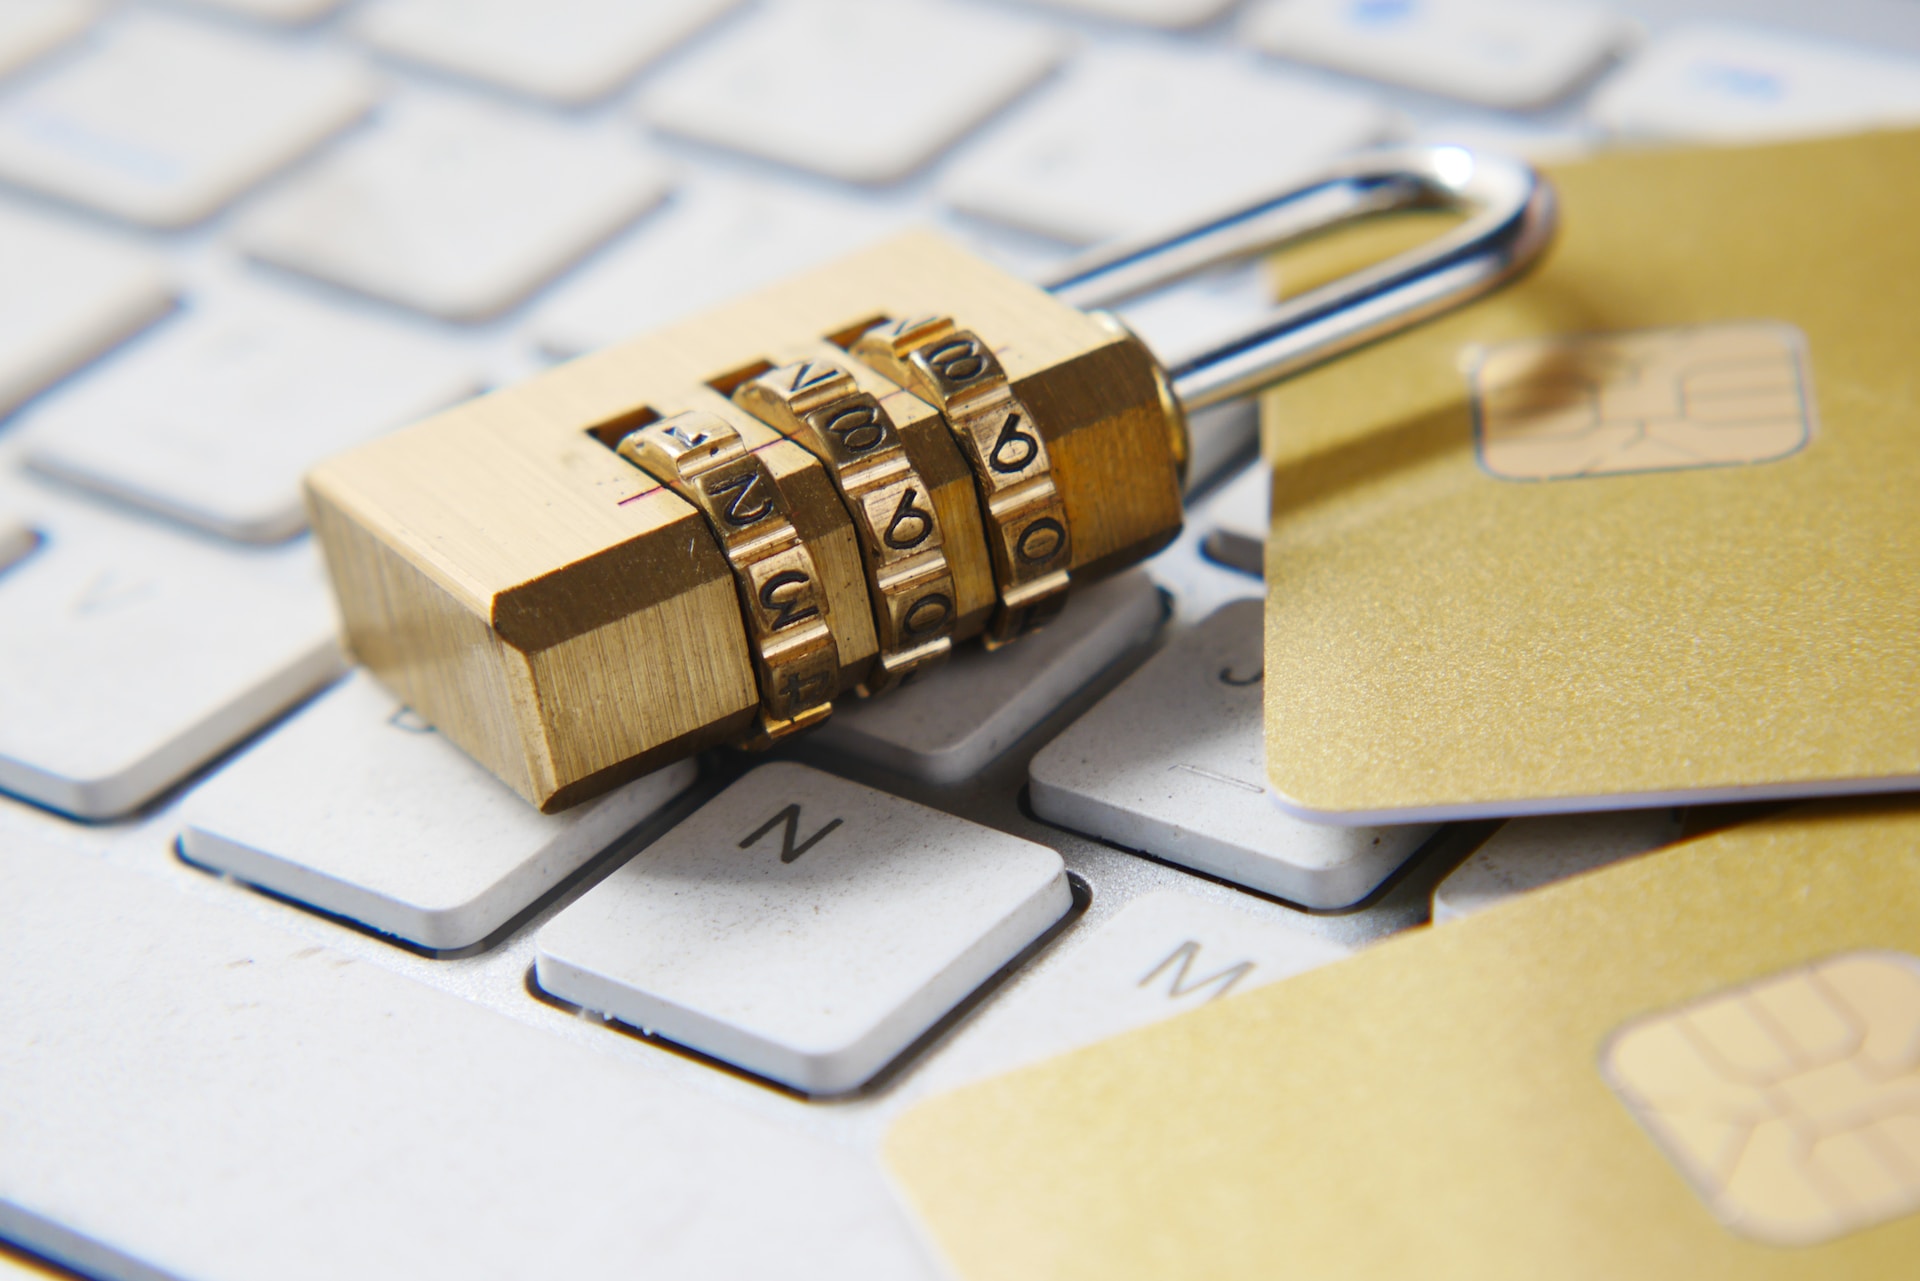 How Does Martide Keep Your Documents Secure?